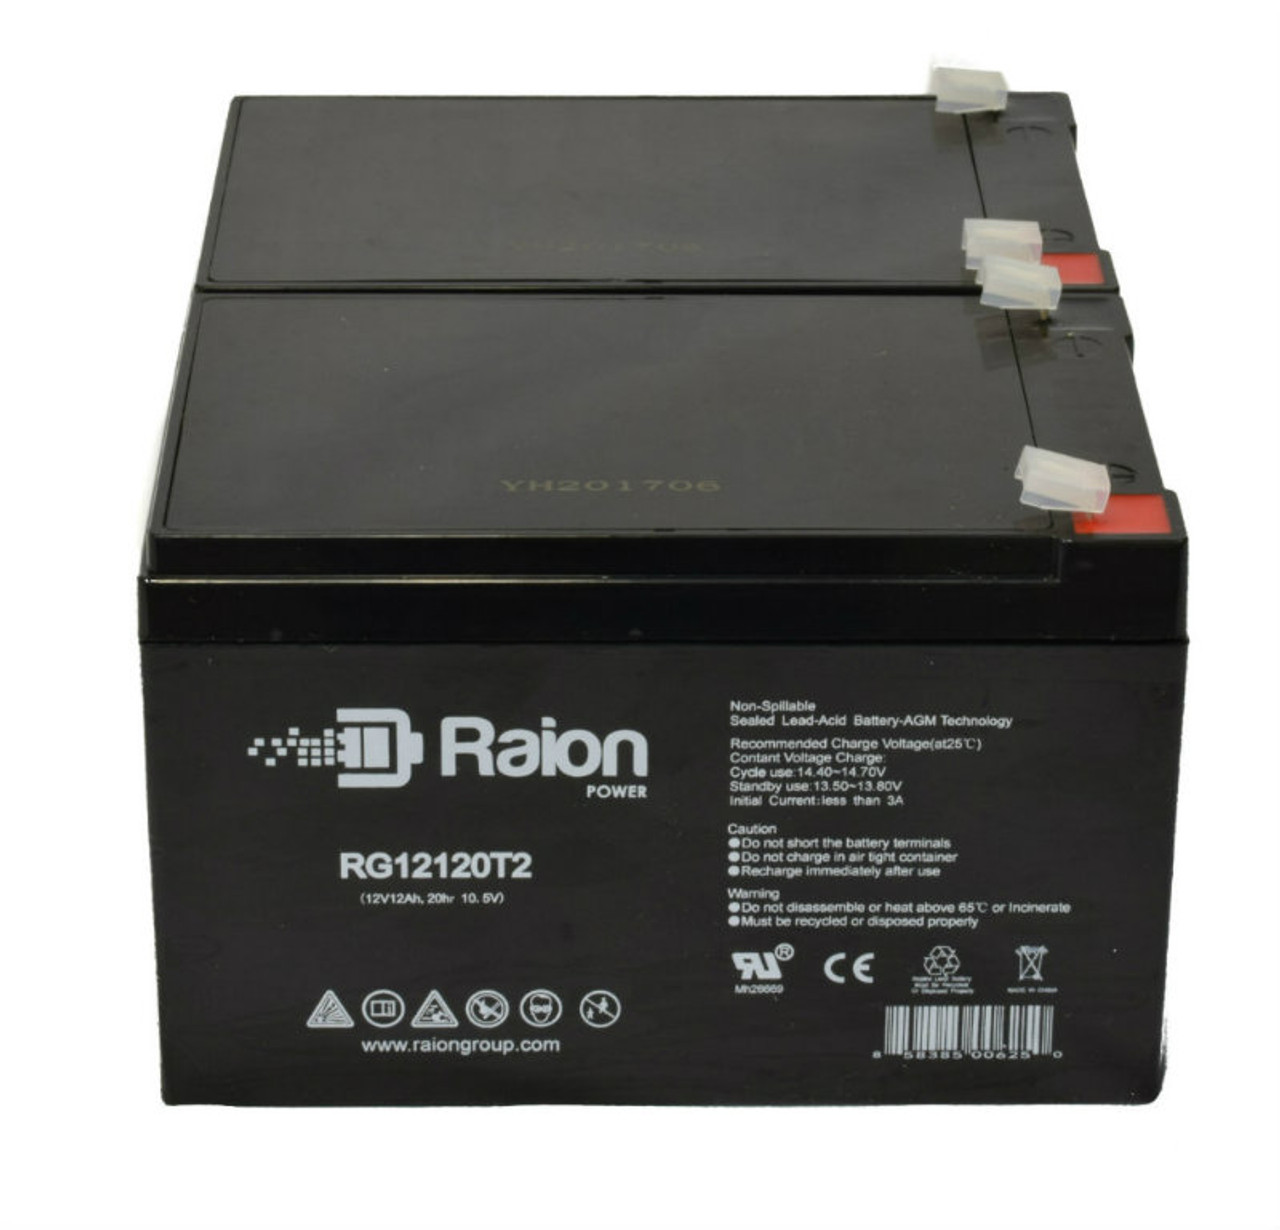 Raion Power RG12120T2 Replacement Battery Set for Bladez Mobility XTRS 807 Mobility Scooter - 2 Pack